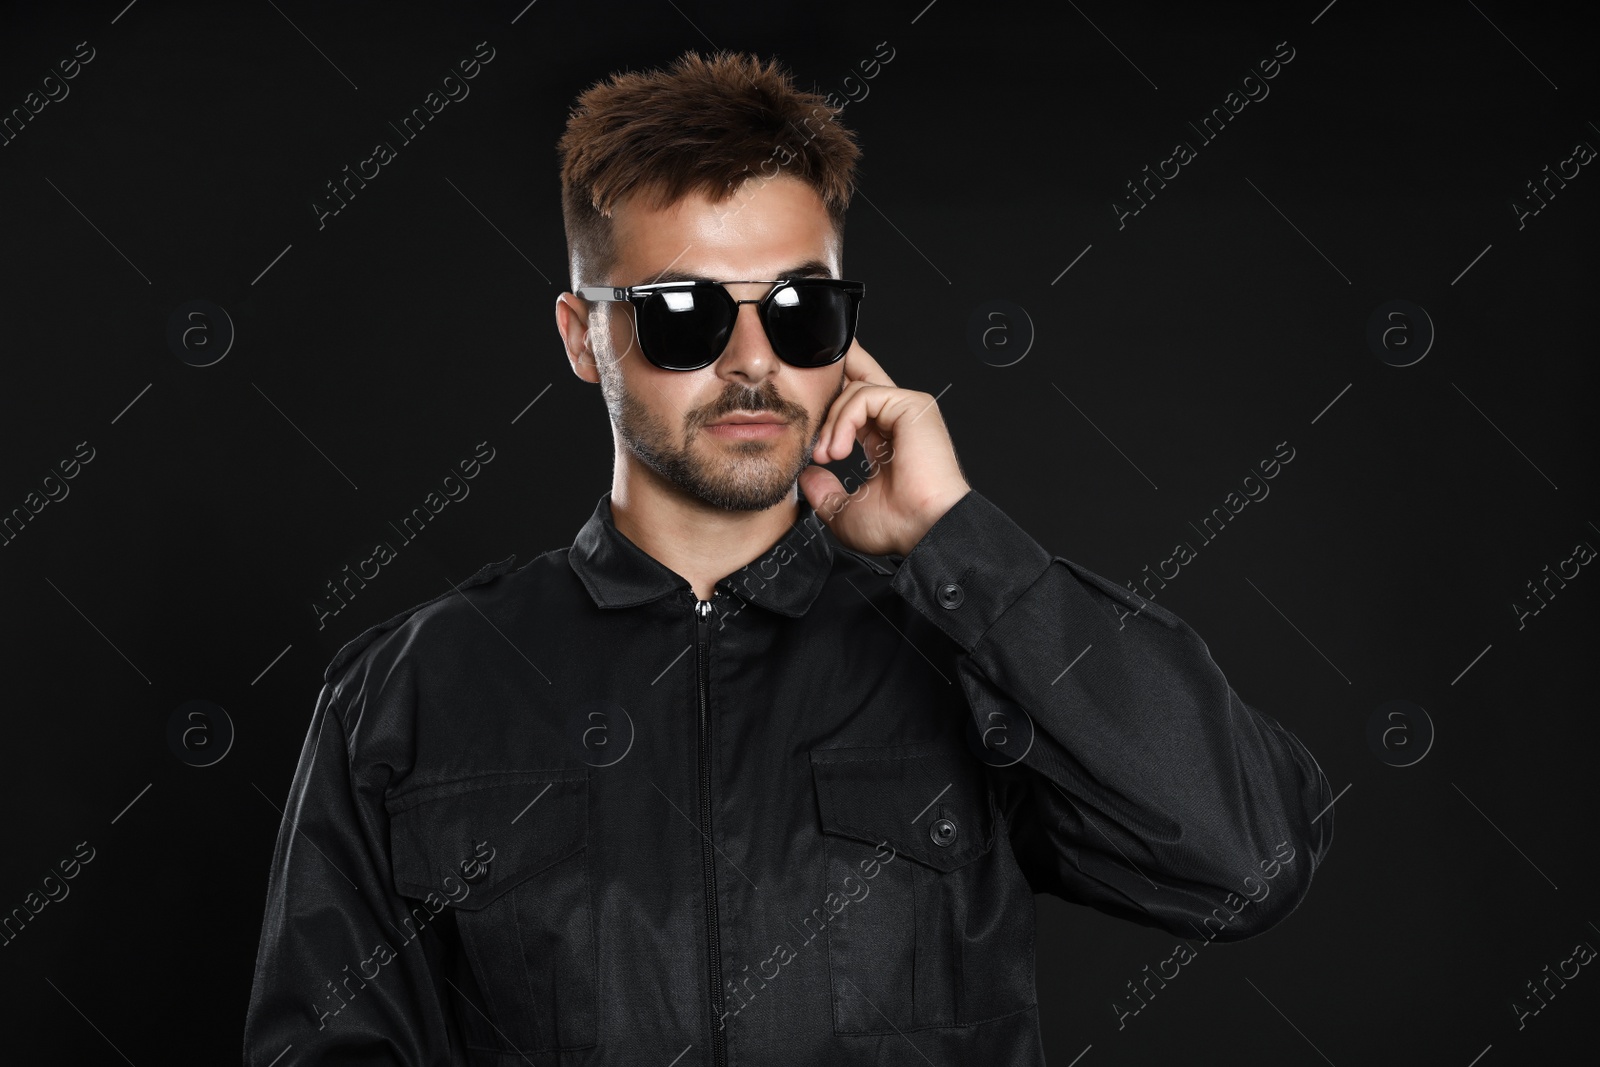 Photo of Male security guard in uniform using radio earpiece on dark background